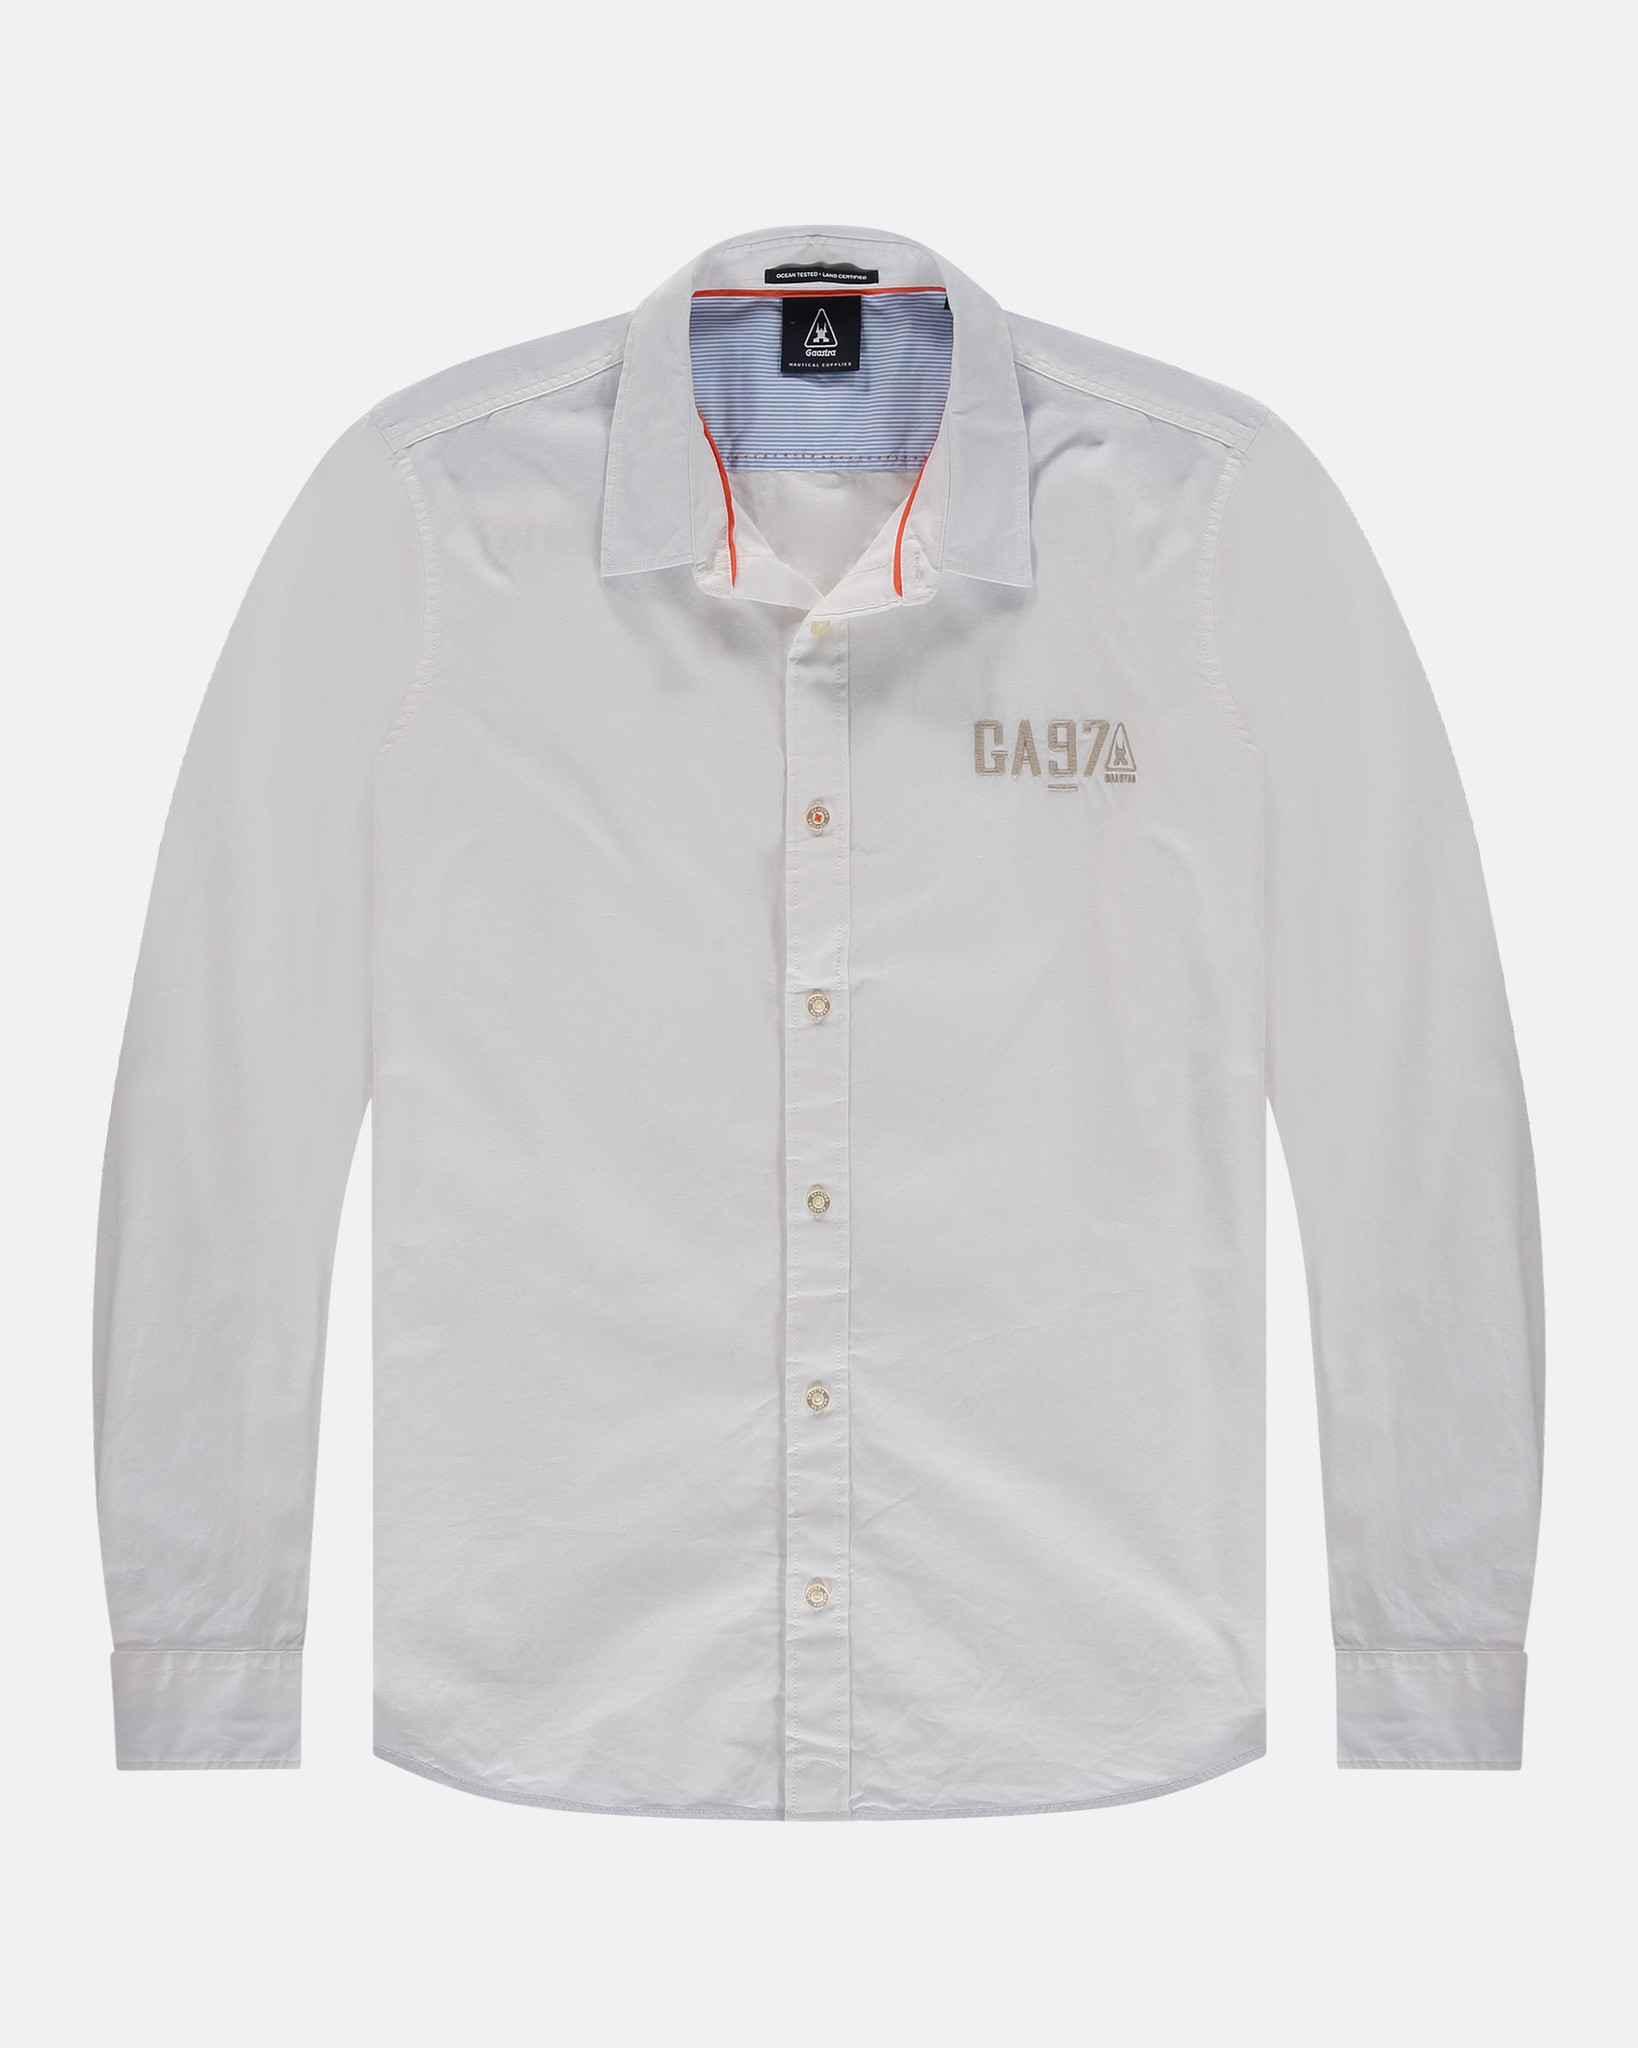 The South East stretch shirt